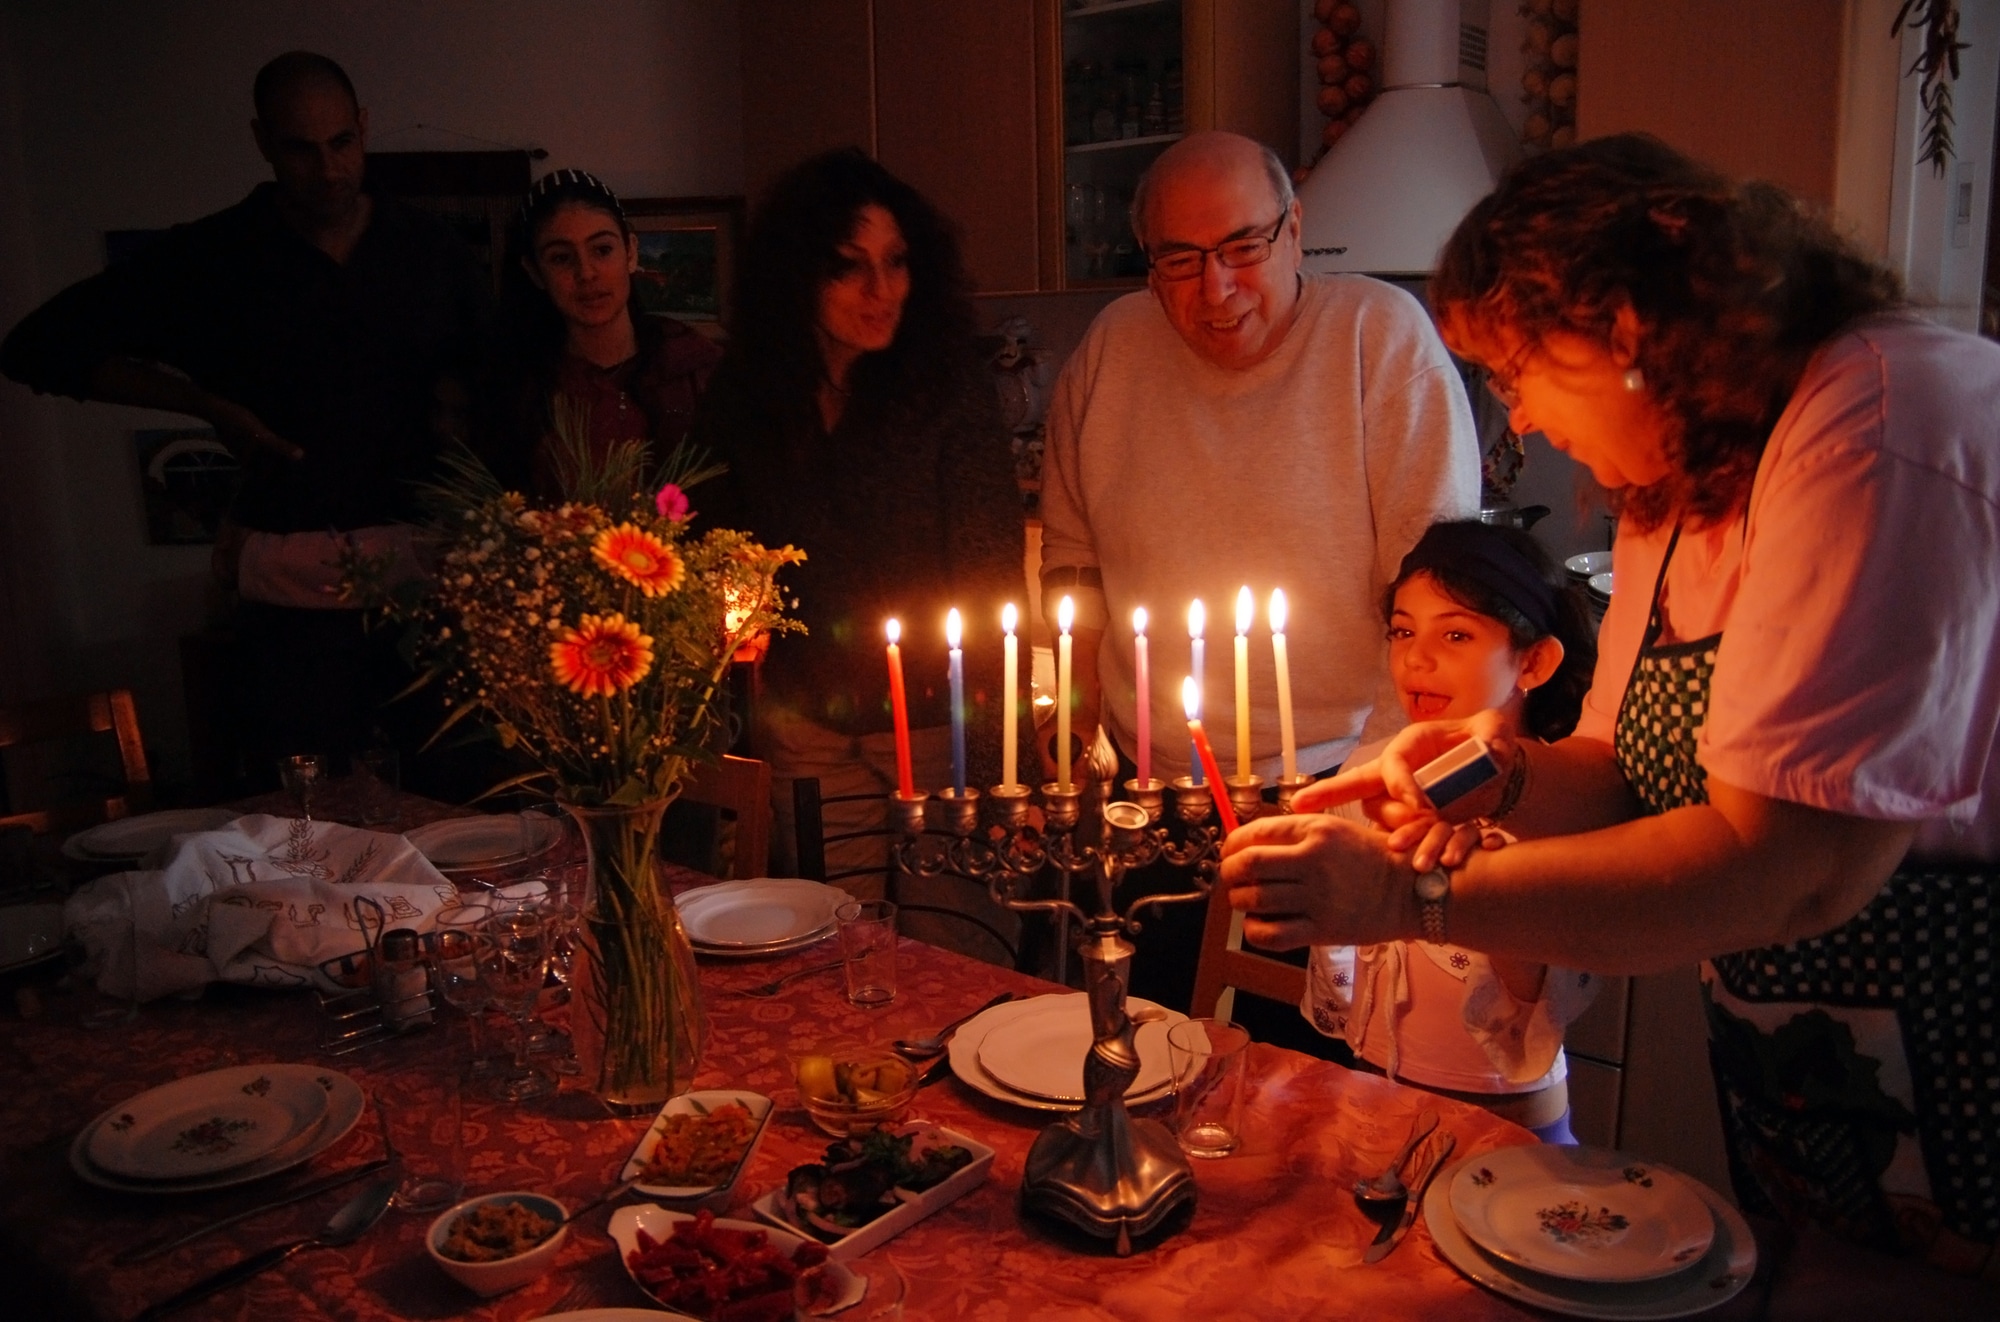 What is the proper way to celebrate Hanukkah?